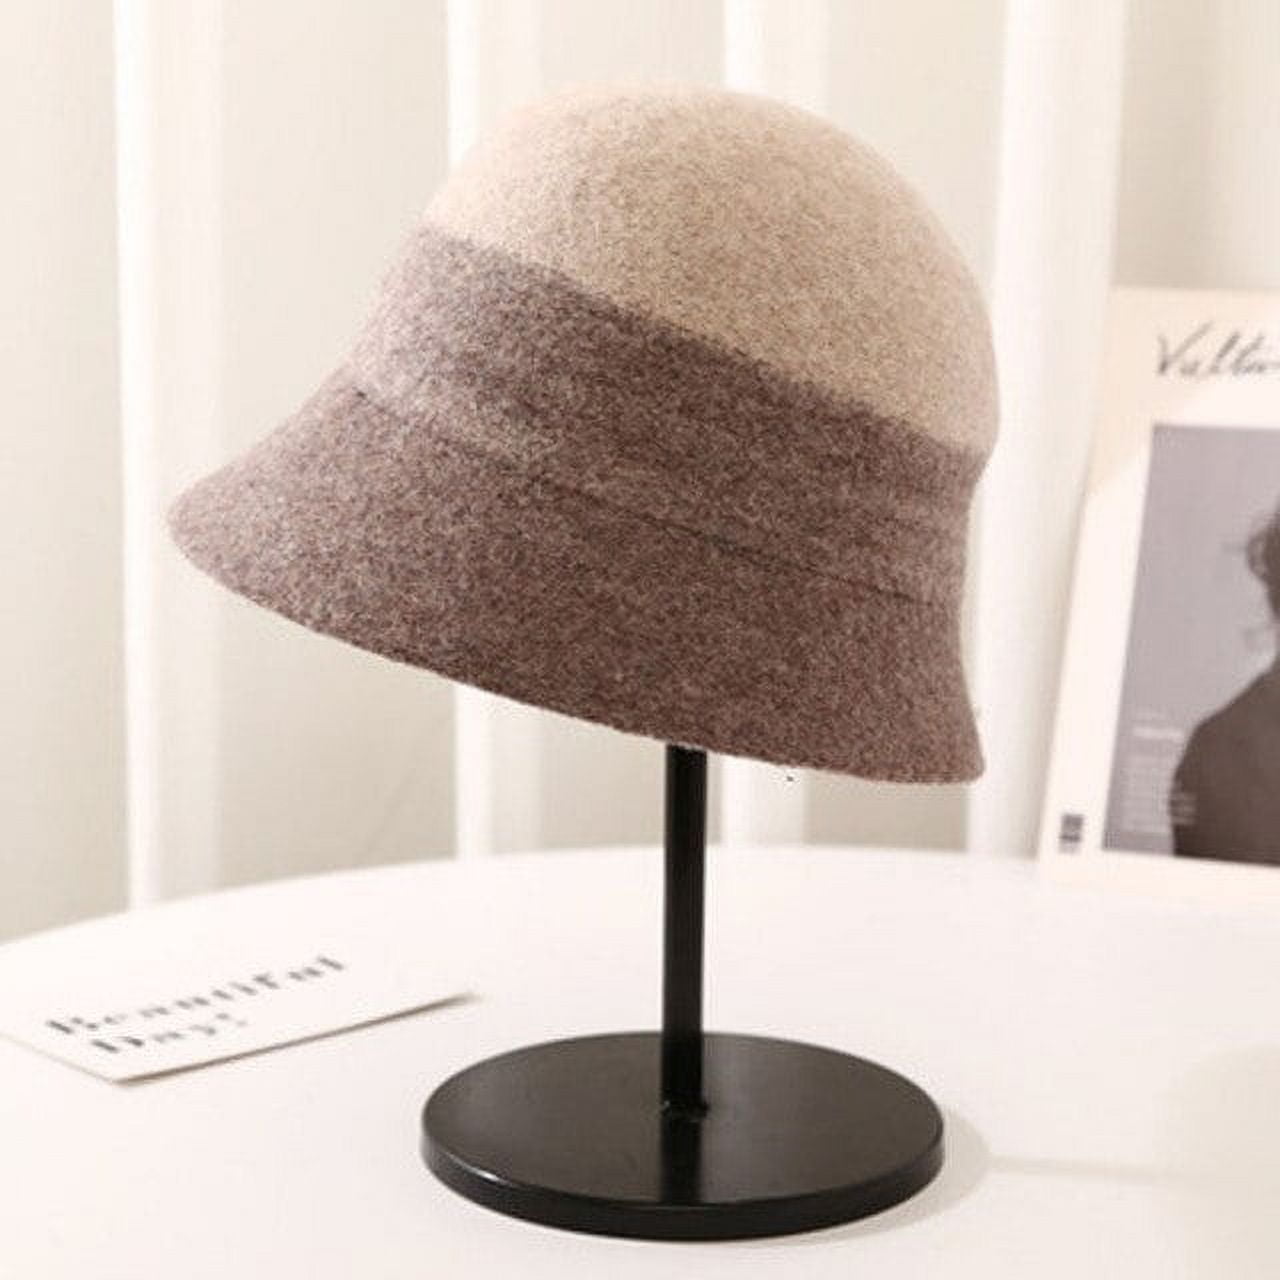 CoCopeaunt High-Quality Wool Top Hat, Women's Autumn And Winter Fisherman  Hat Retro Fashion Knit Wool Top Hat Round Top Small Pot Hat 